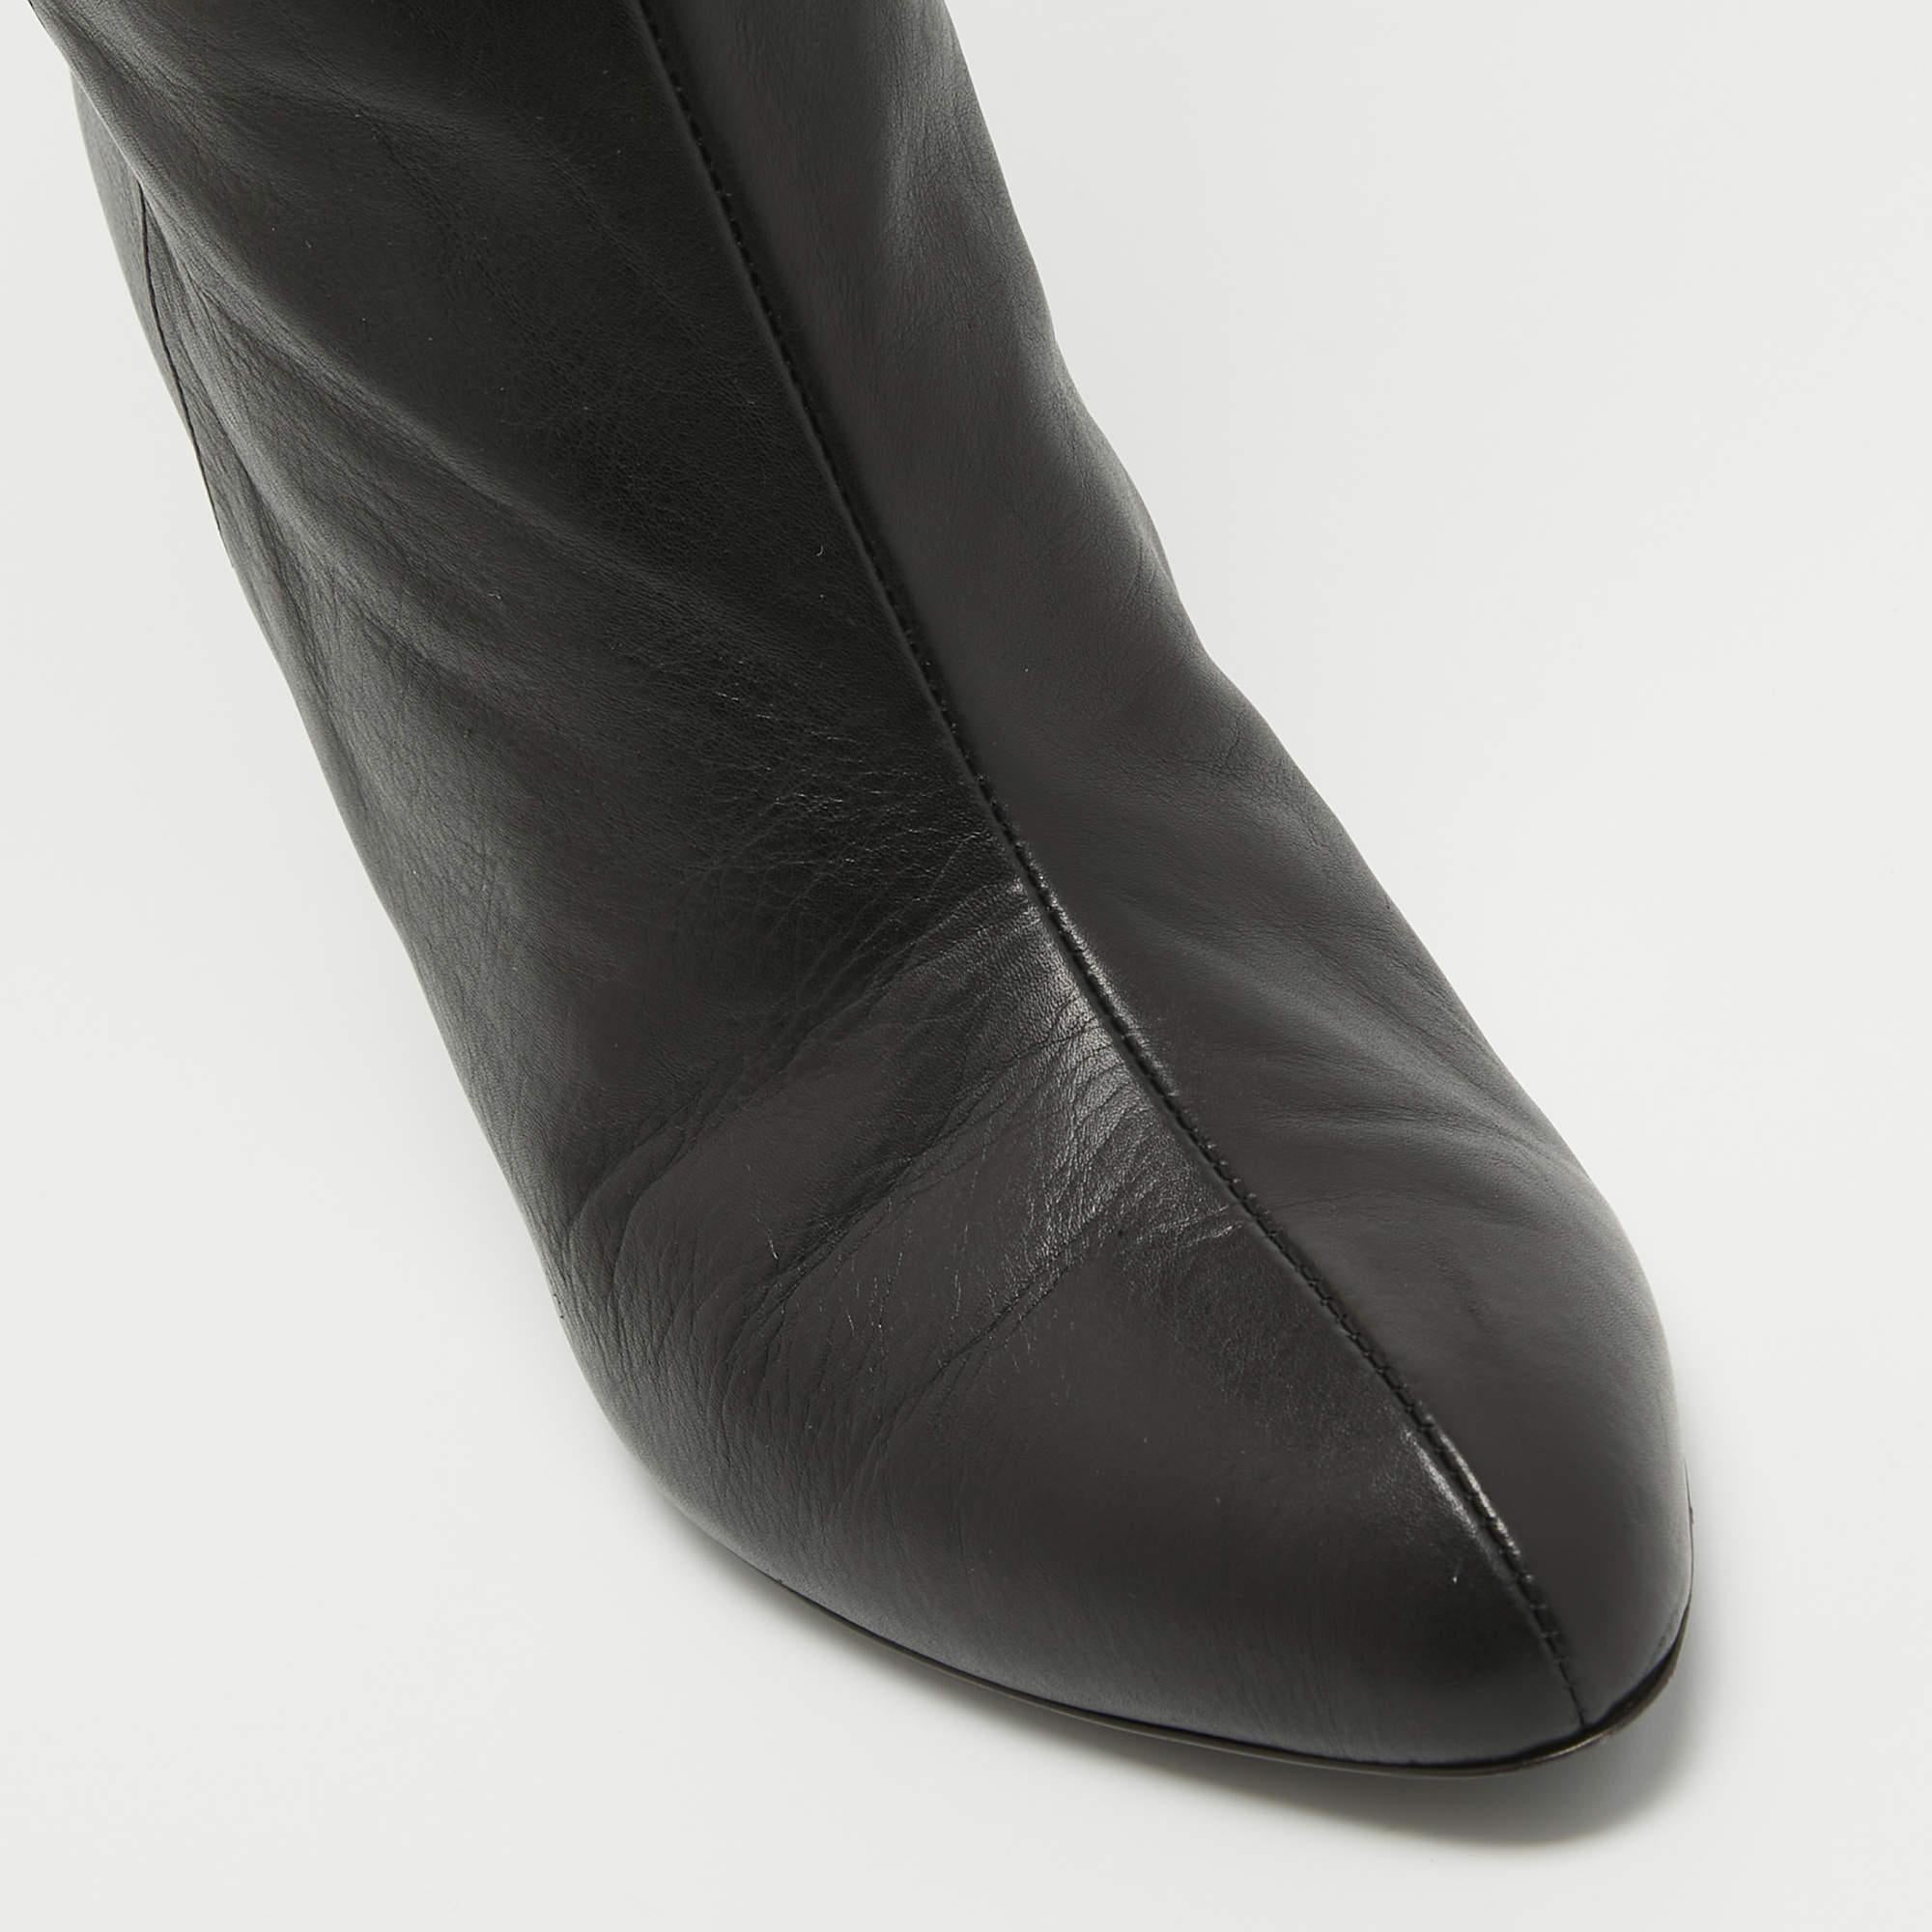 Gucci Black Leather Knee Length Boots Size 40 5